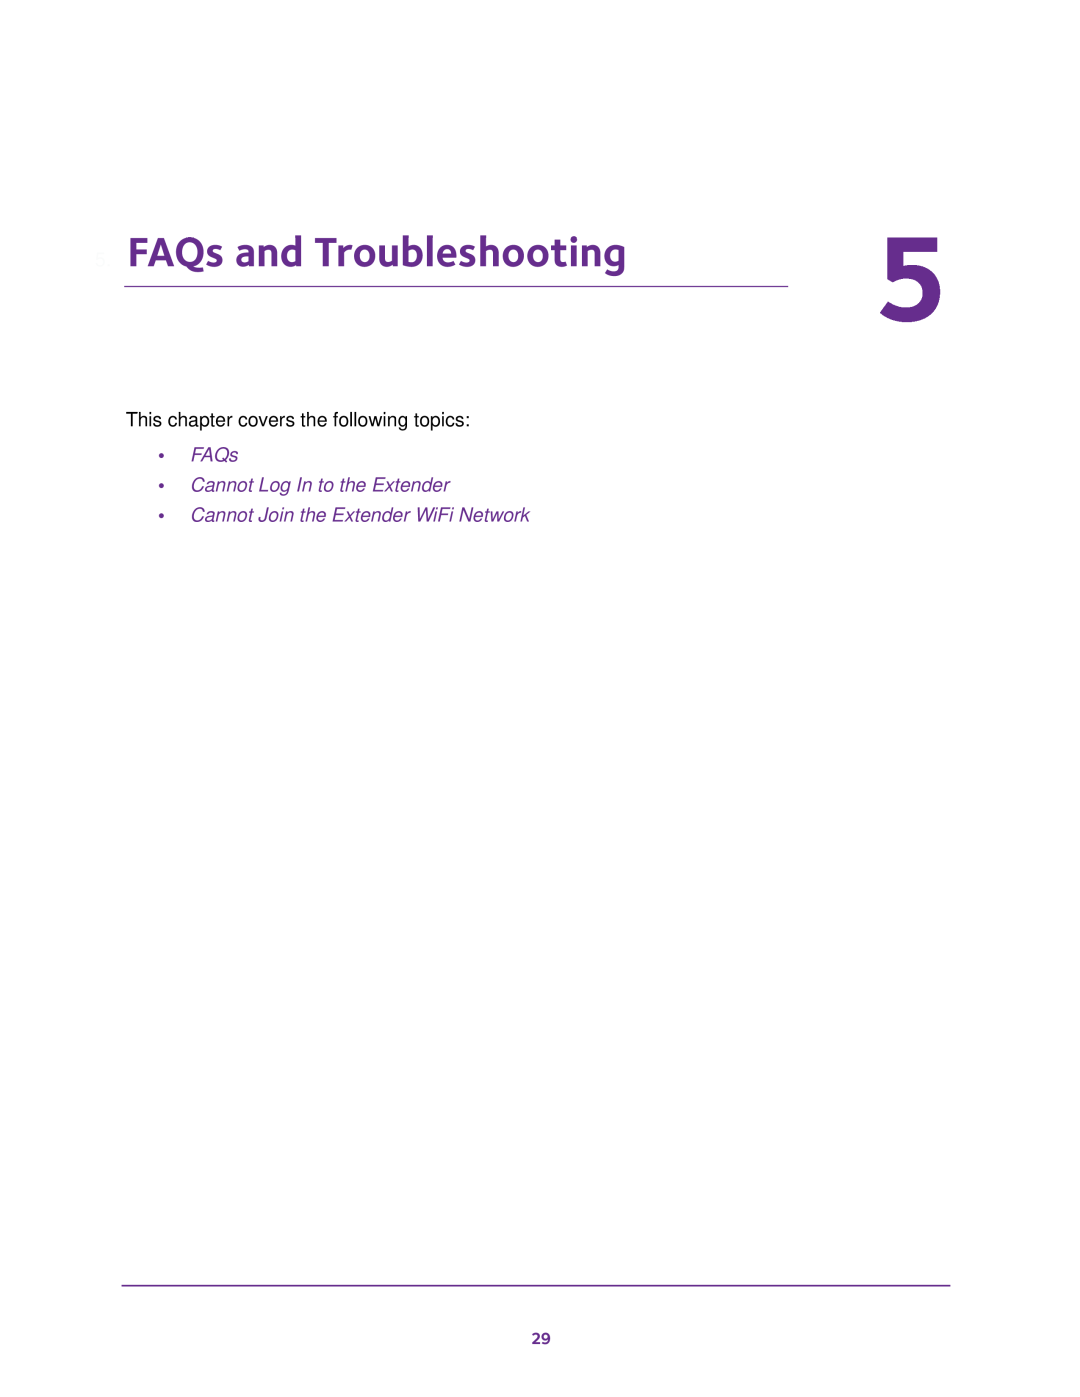 NETGEAR EX2700 FAQs and Troubleshooting, FAQs Cannot Log In to the Extender, Cannot Join the Extender WiFi Network 